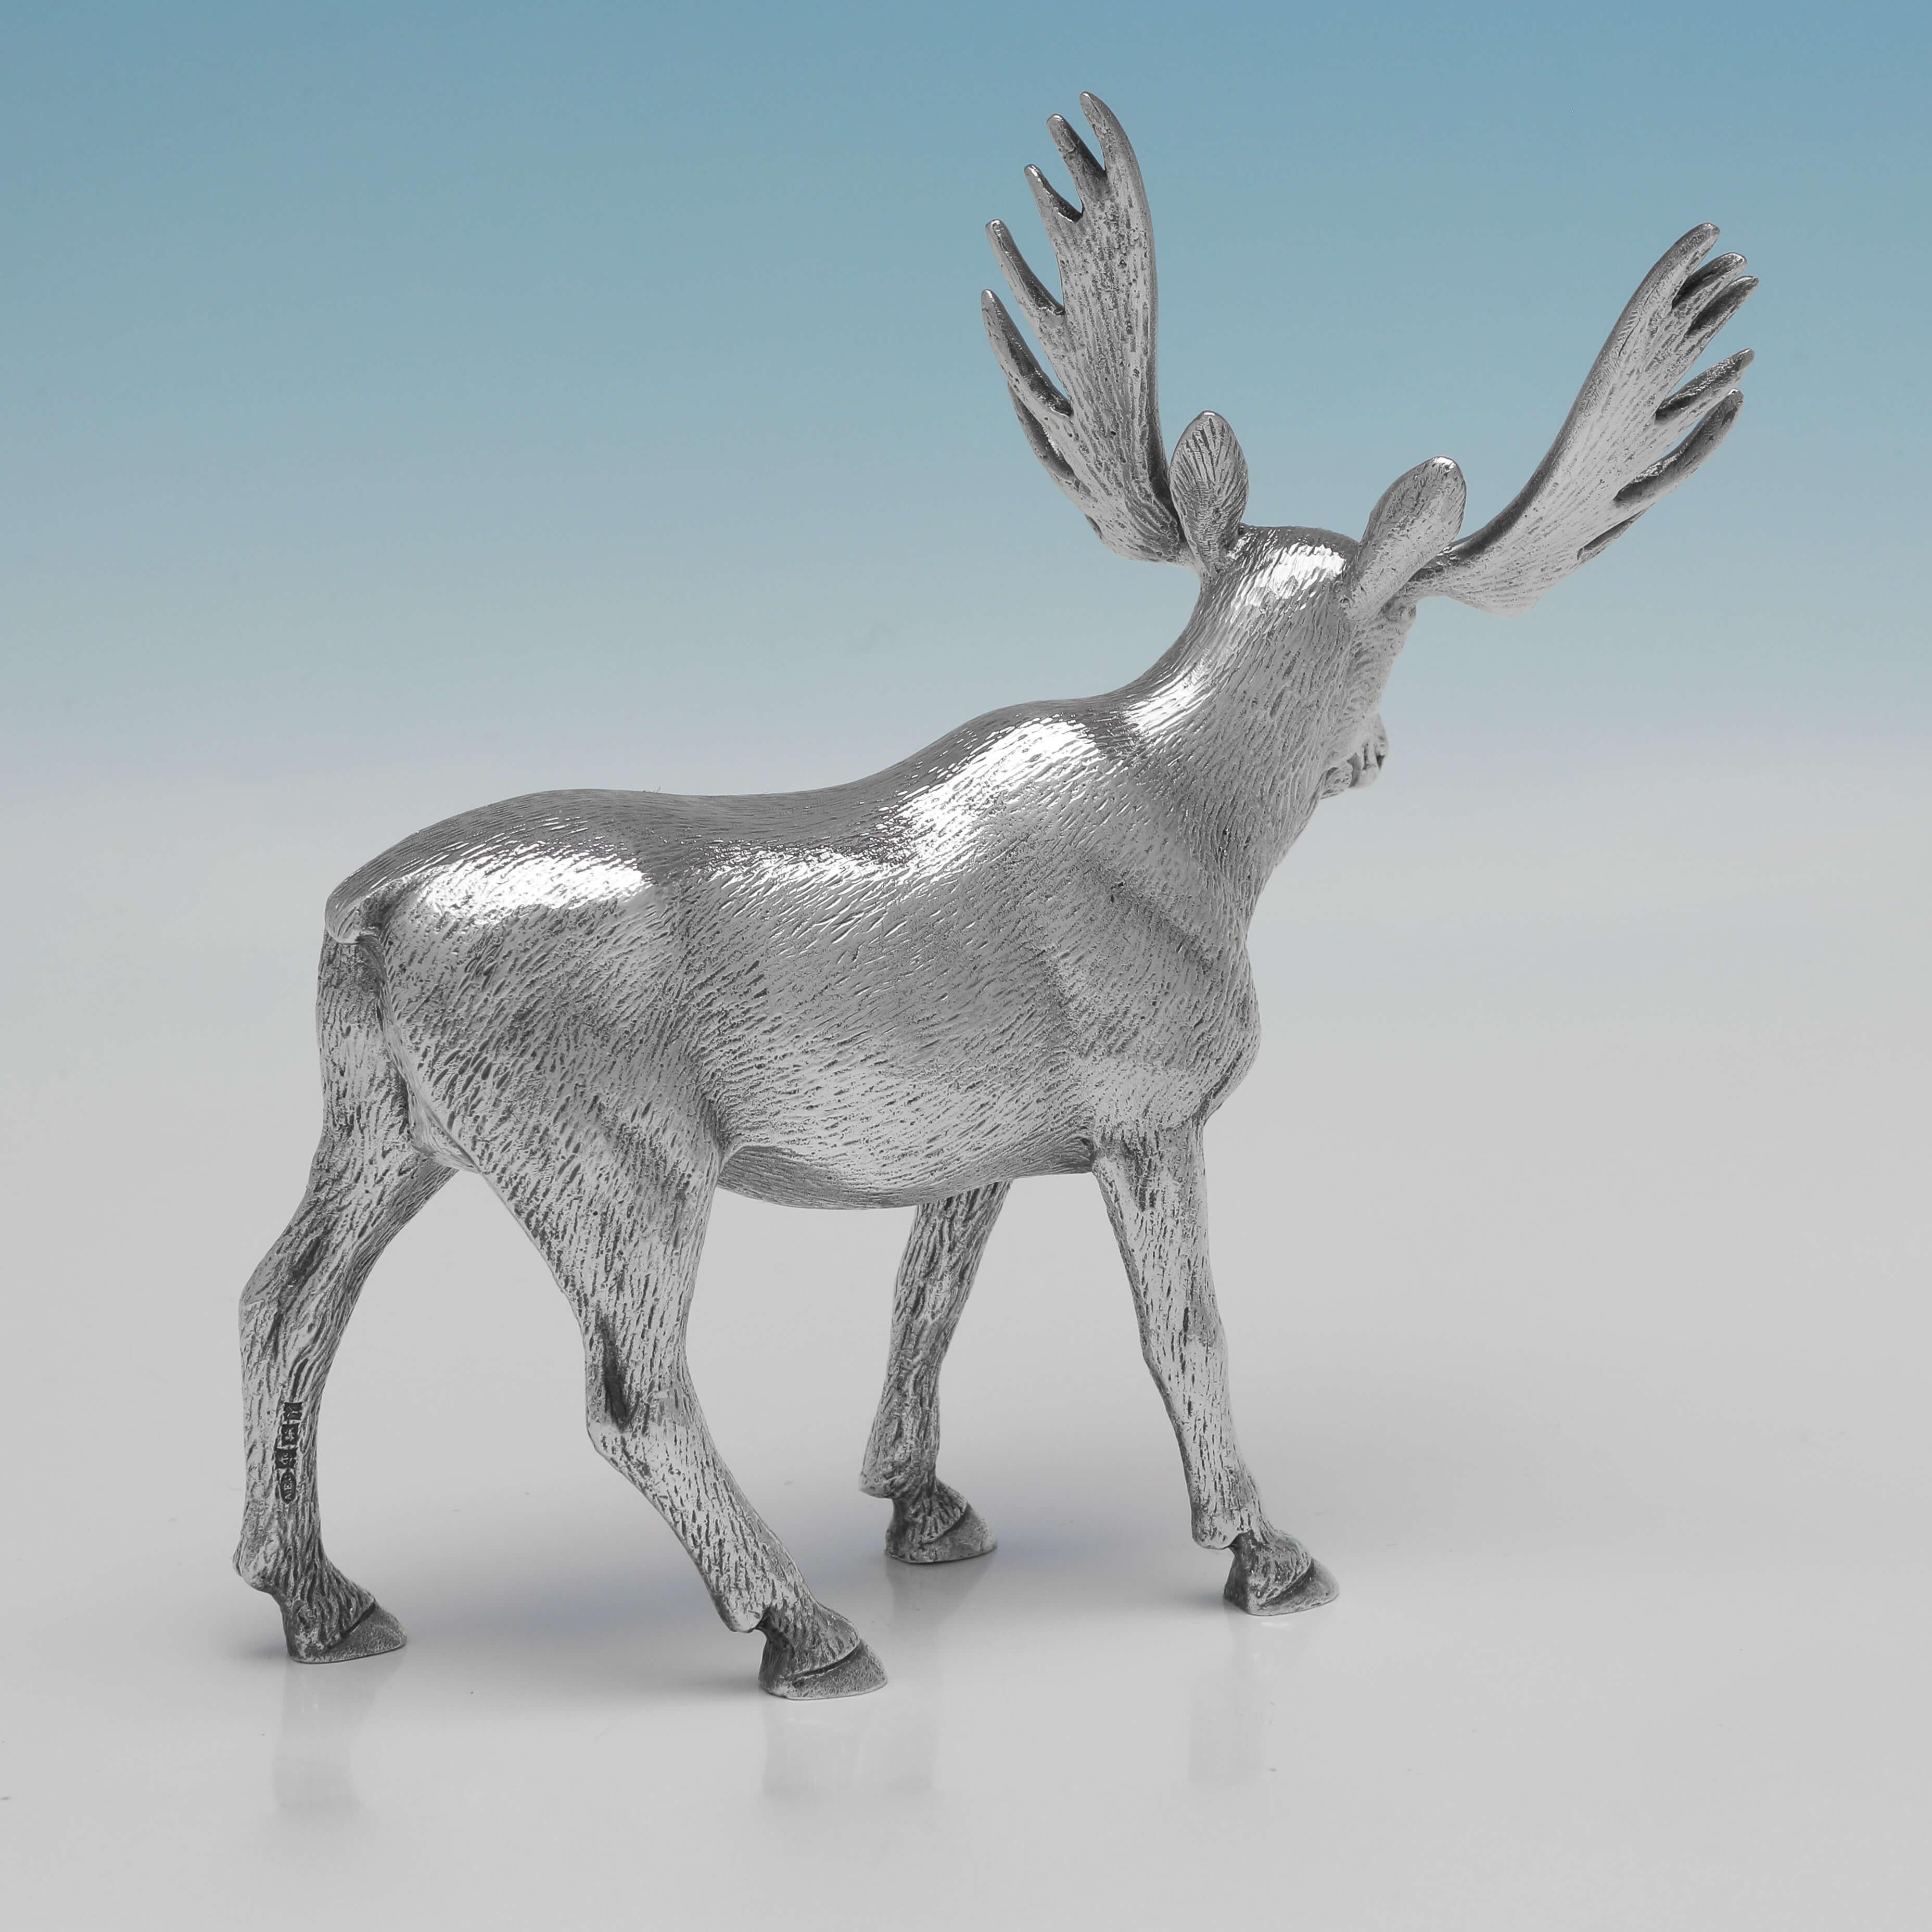 Hallmarked in Birmingham in 1973 by A. E. Jones, this handsome Sterling Silver Model of a Moose, is realistically cast. The moose measures 5.75